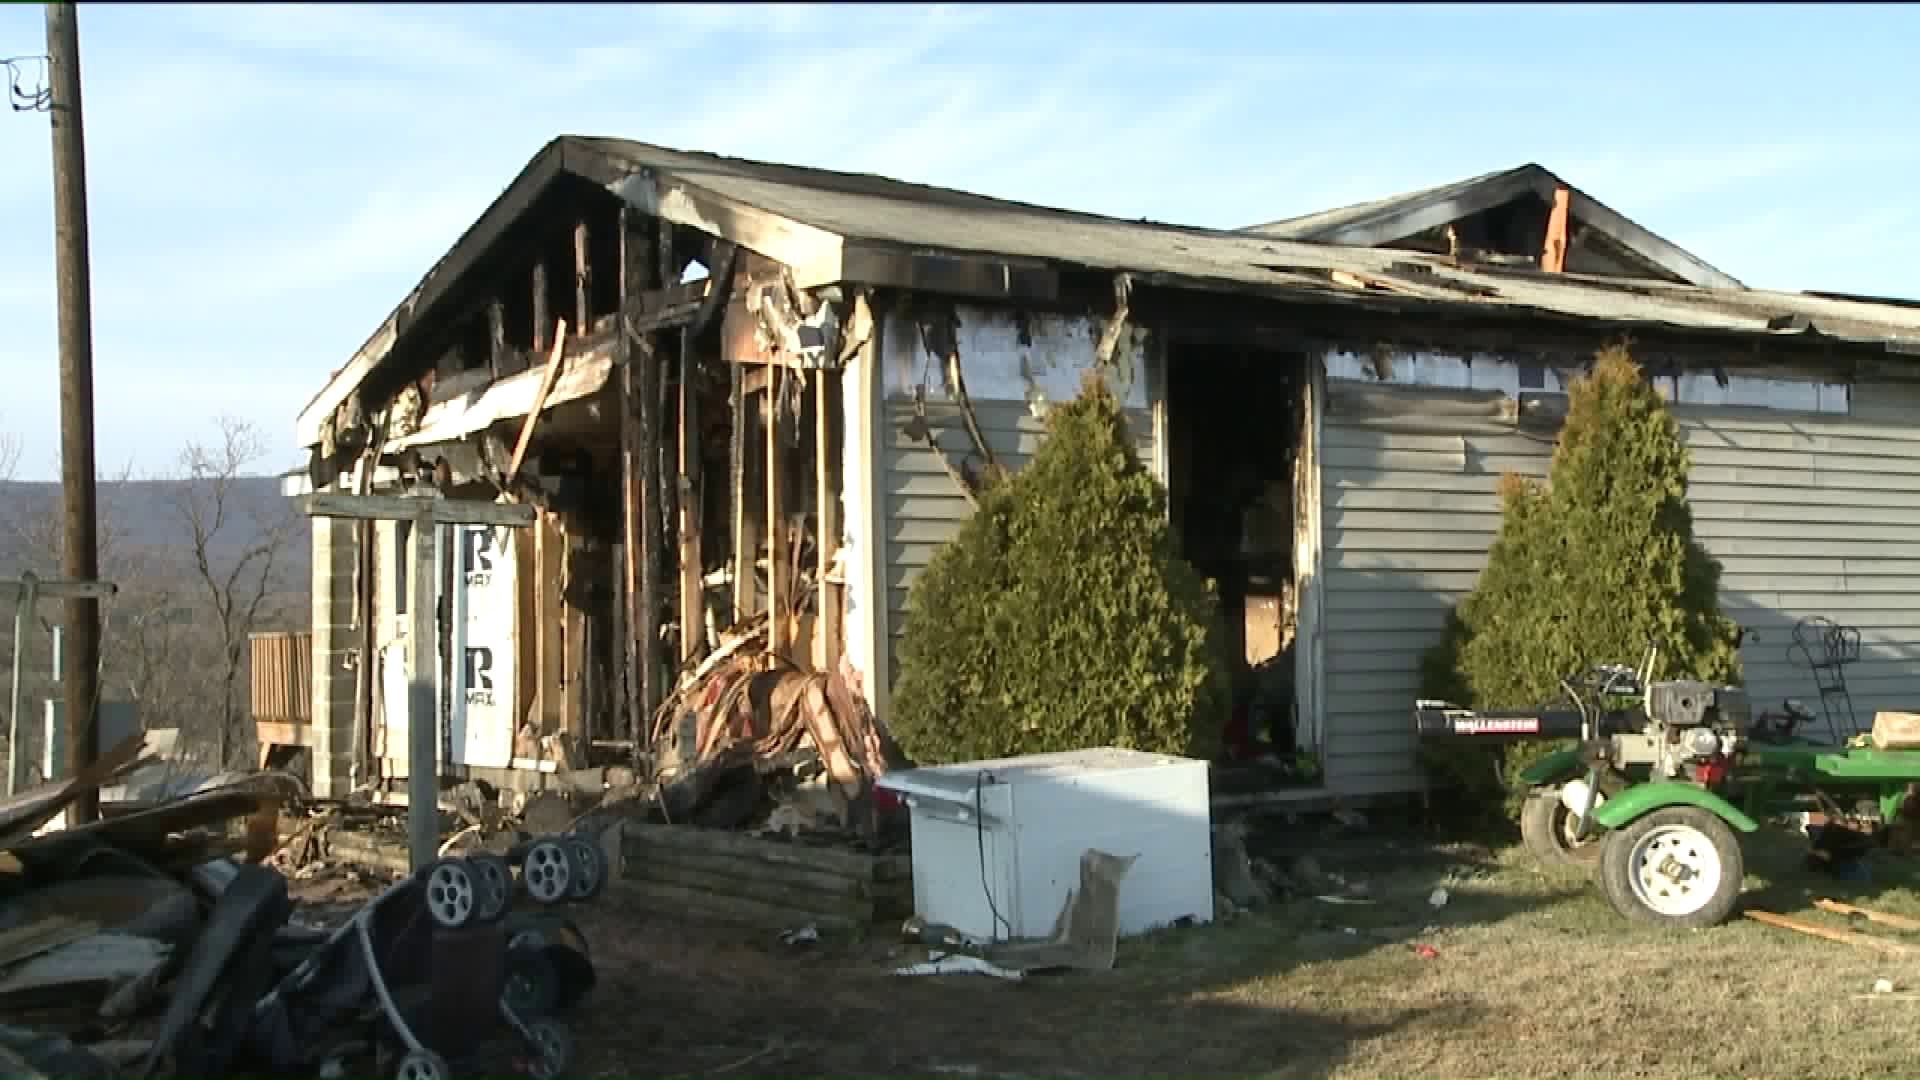 Family, Friends Support Couple After Fire Claims Home, Belongings